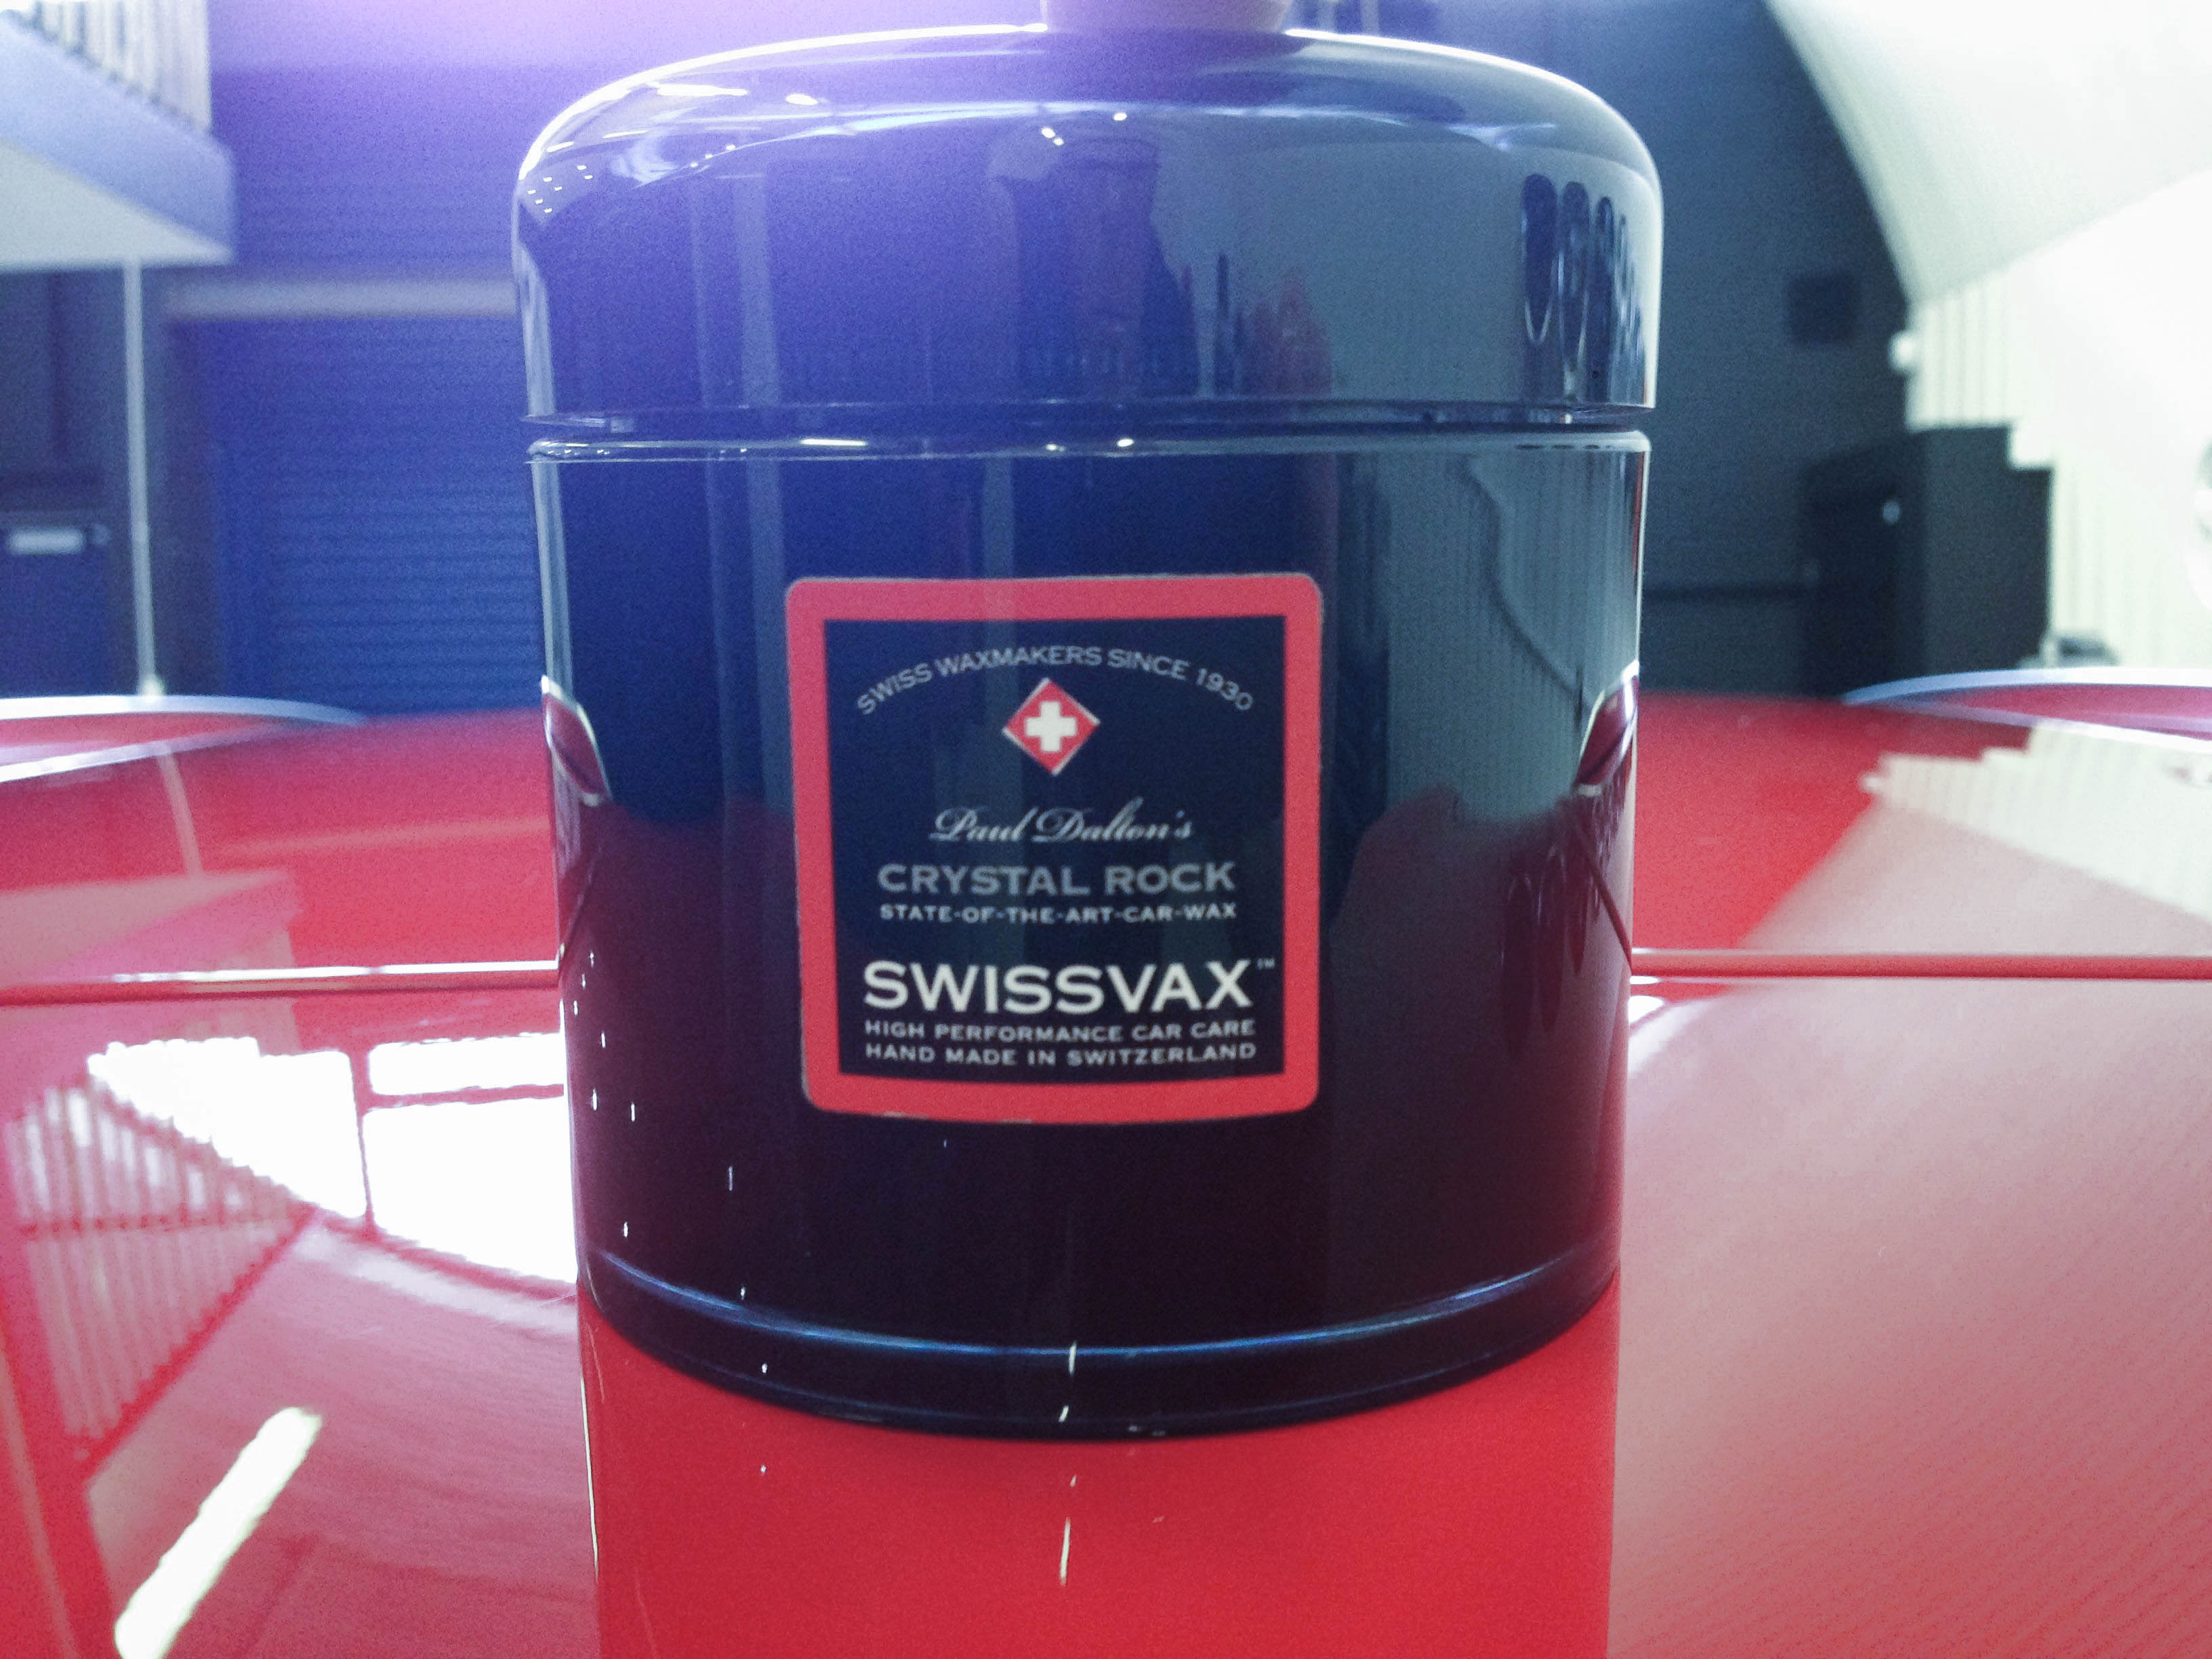 Audi A3 (Misano Red) – Finished in Swissvax Crystal Rock